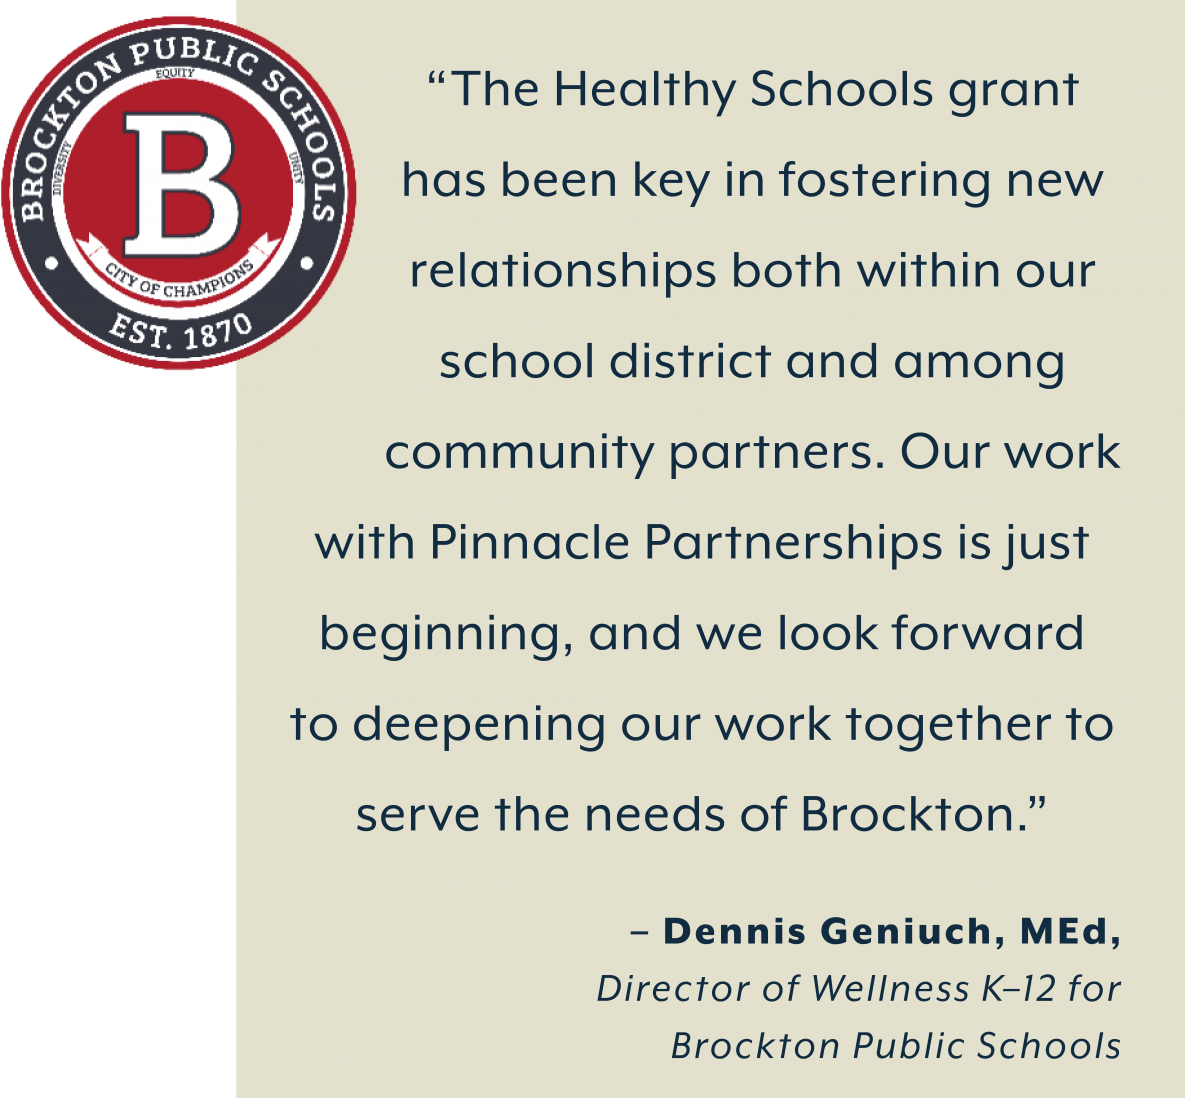 Brockton Public Schools Logo. “The Healthy Schools grant  has been key in fostering new  relationships both within our  school district and among  community partners. Our work  with Pinnacle Partnerships is just  beginning, and we look forward  to deepening our work together to  serve the needs of Brockton.”  – Dennis Geniuch, MEd, Director of Wellness K–12 for  Brockton Public Schools